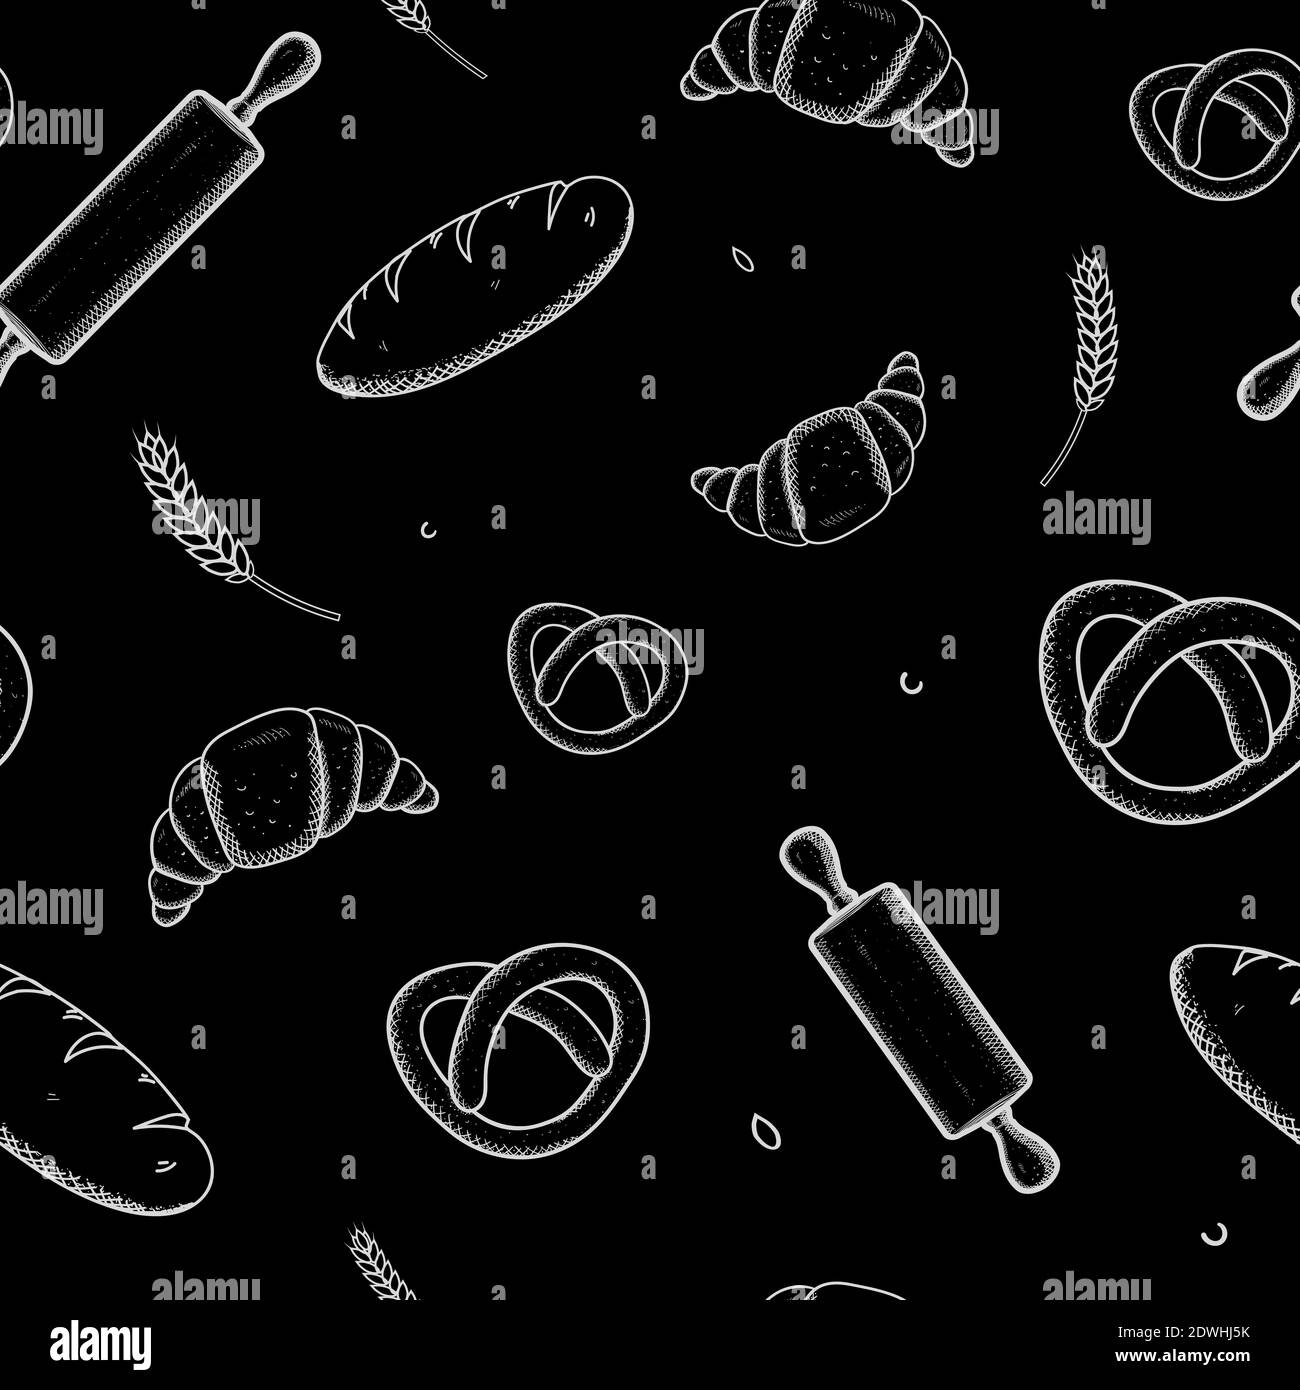 Hand drawn seamless pattern sketches on chalkboard of bread and bakery products. Baked goods background. Vector illustration. Stock Vector